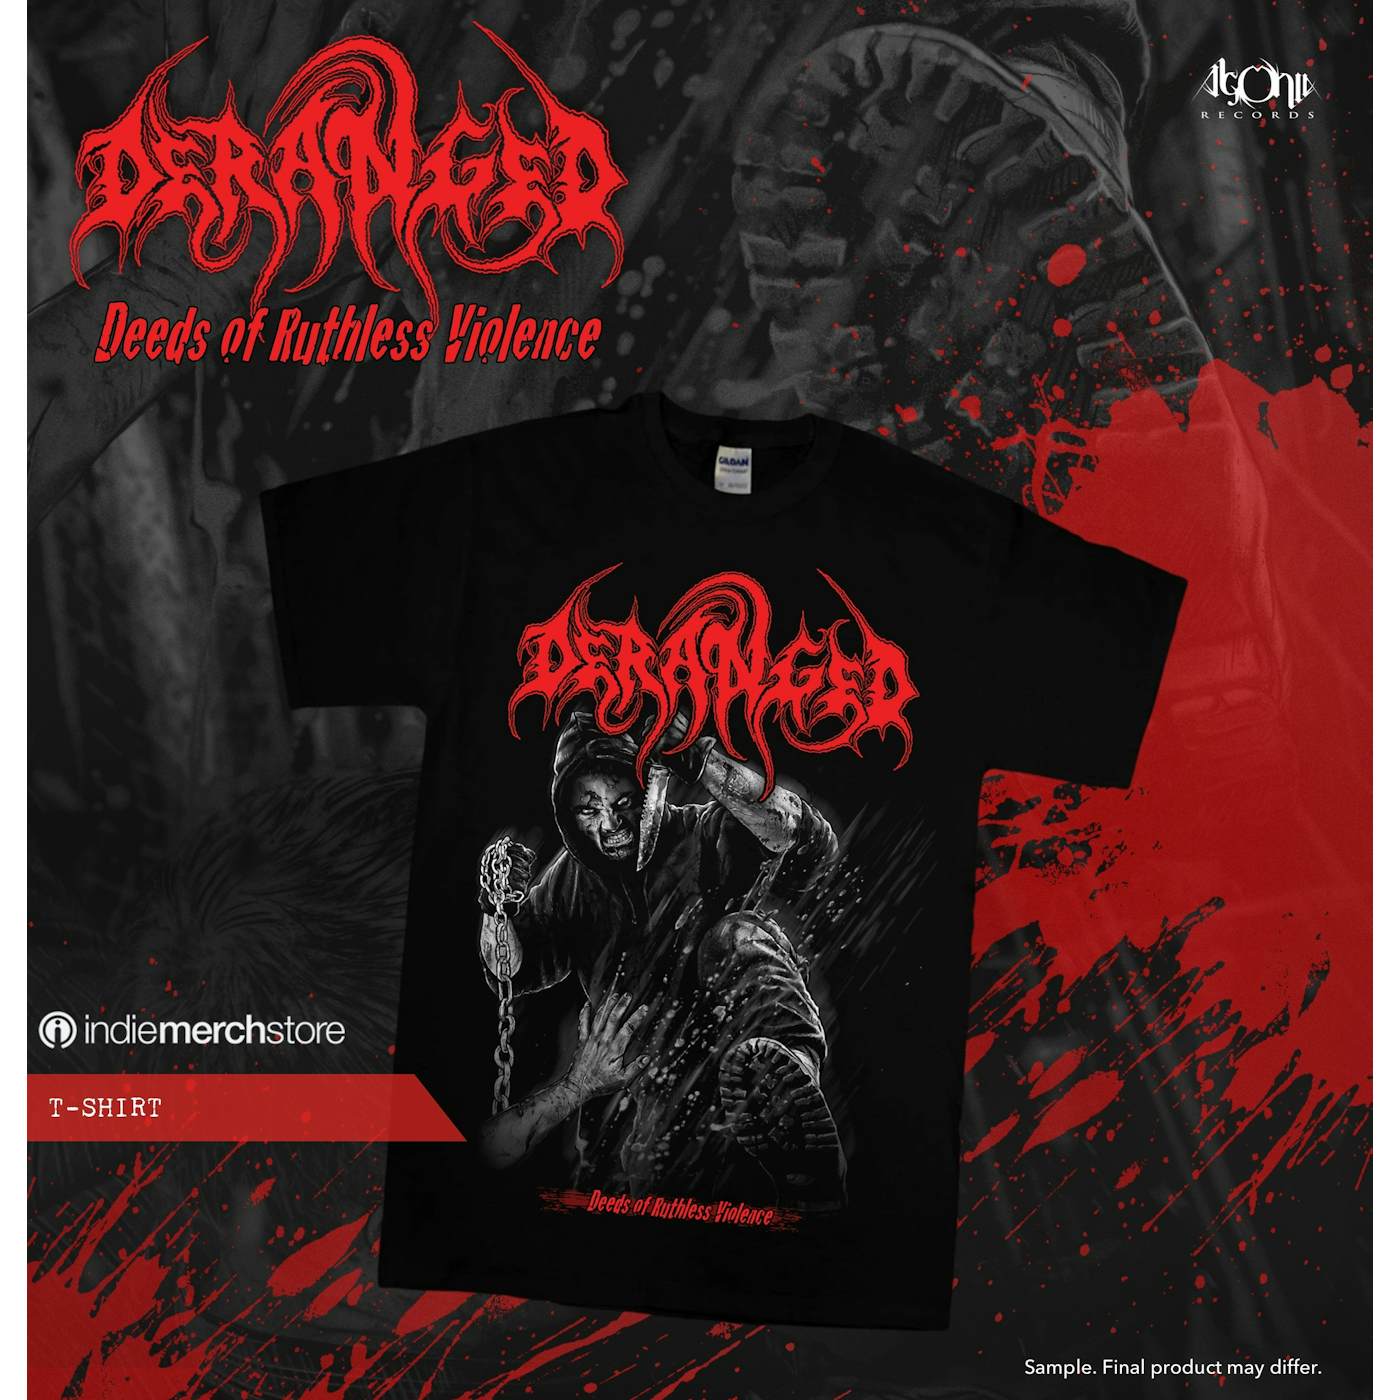 Deranged "Deeds Of Ruthless Violence" Limited Edition T-Shirt